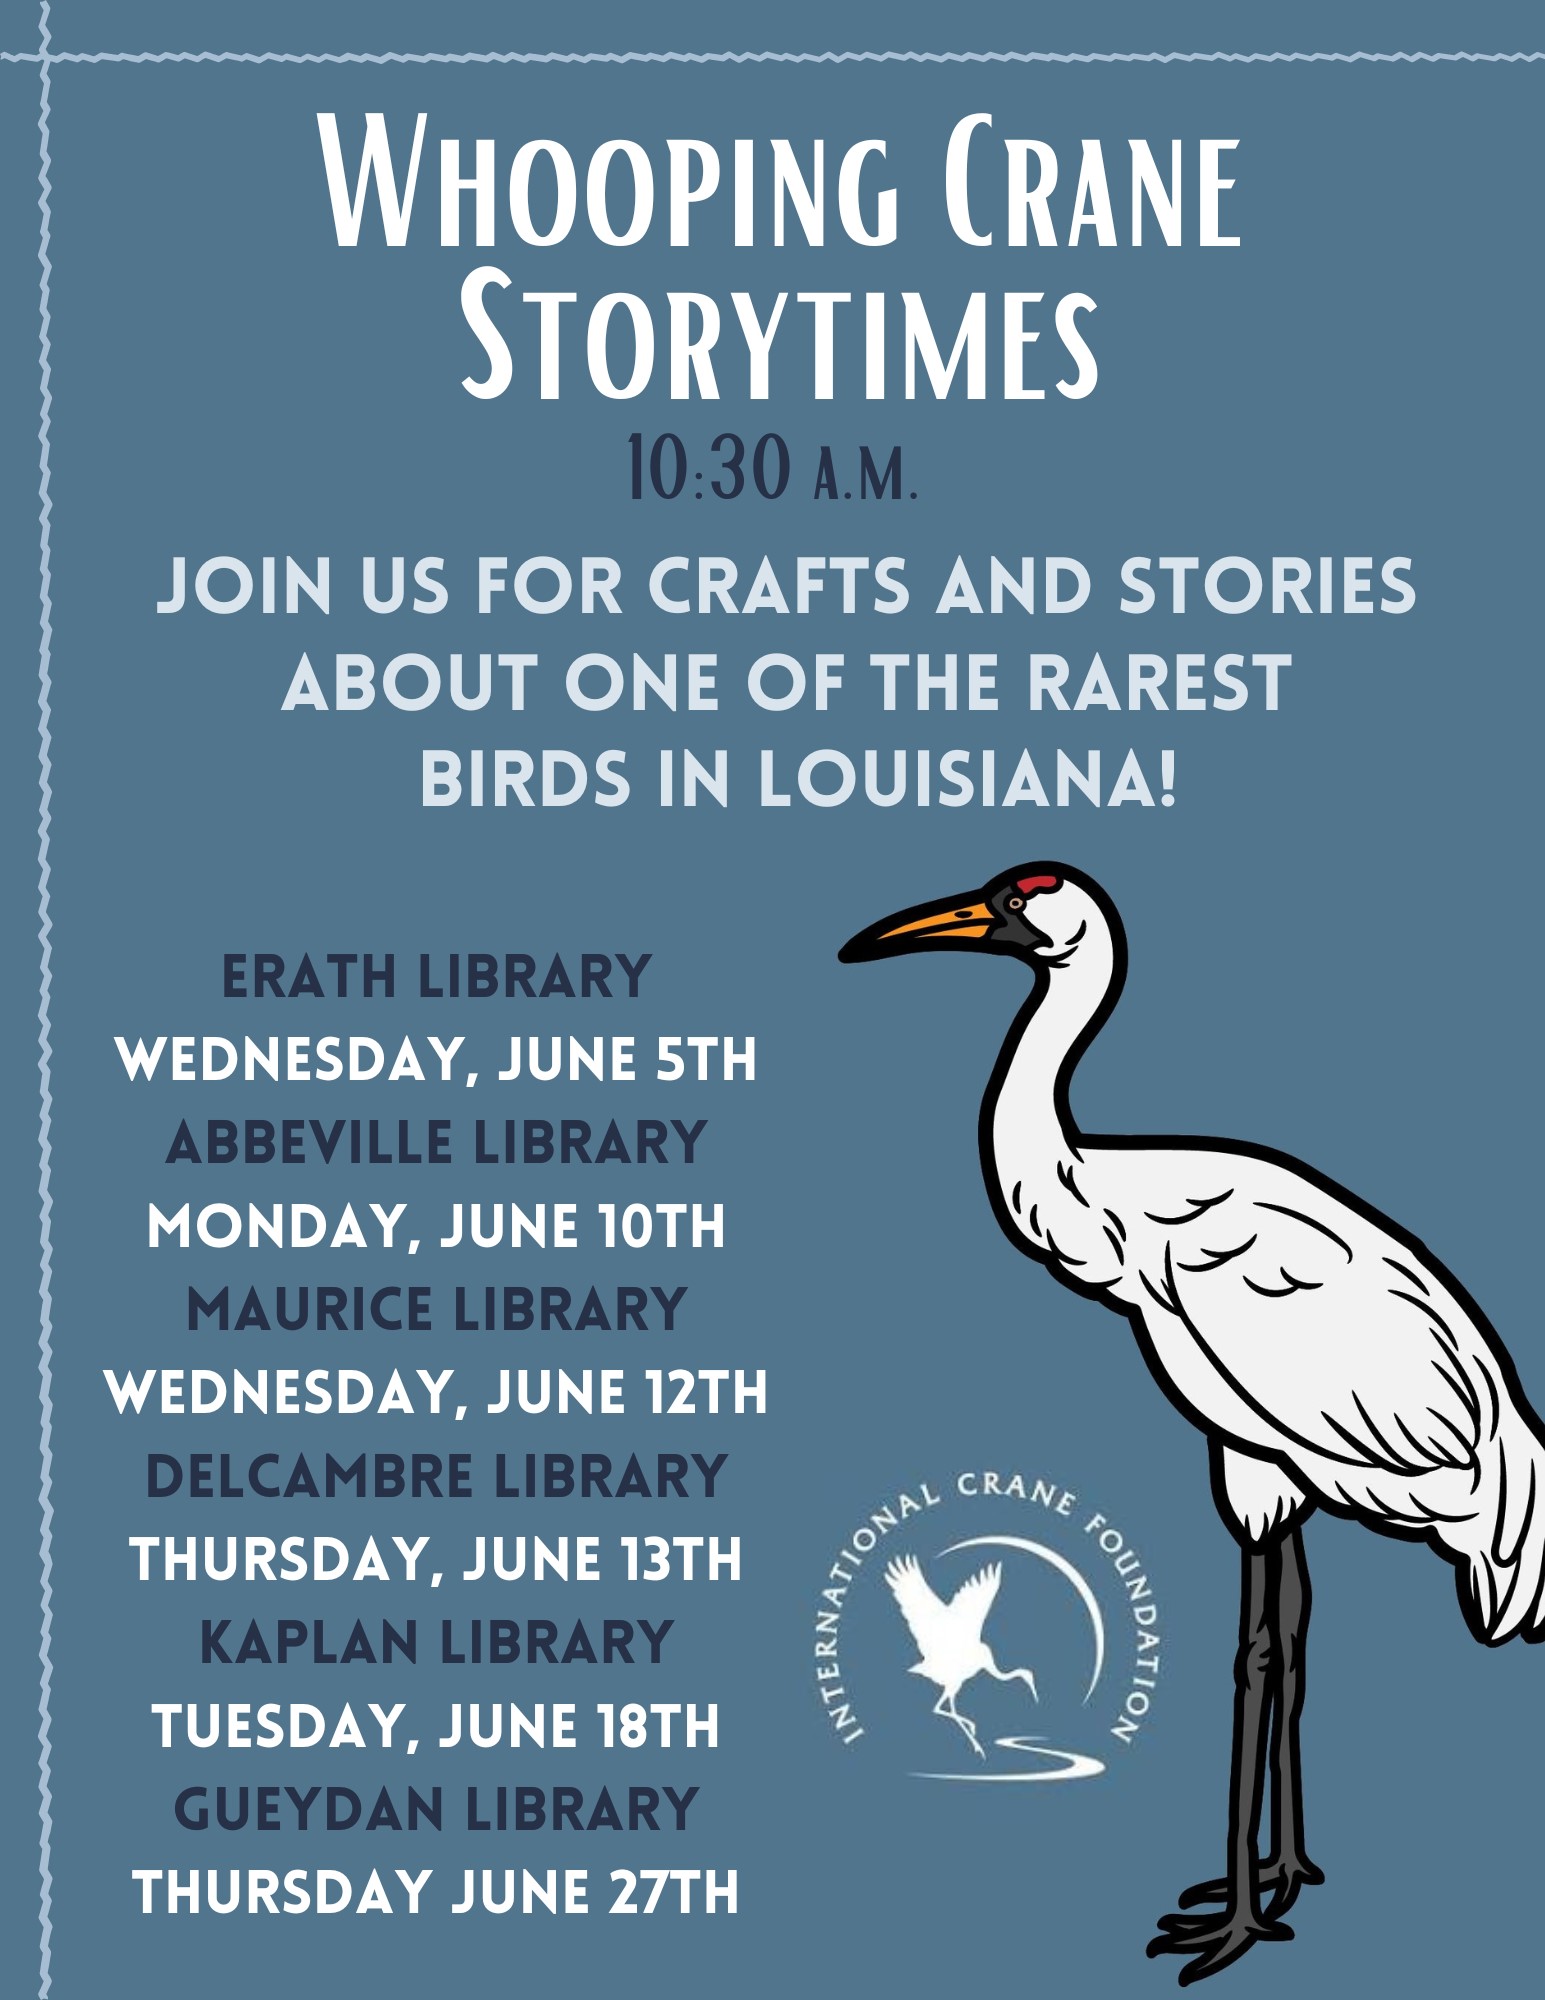 Whooping Crane Storytimes